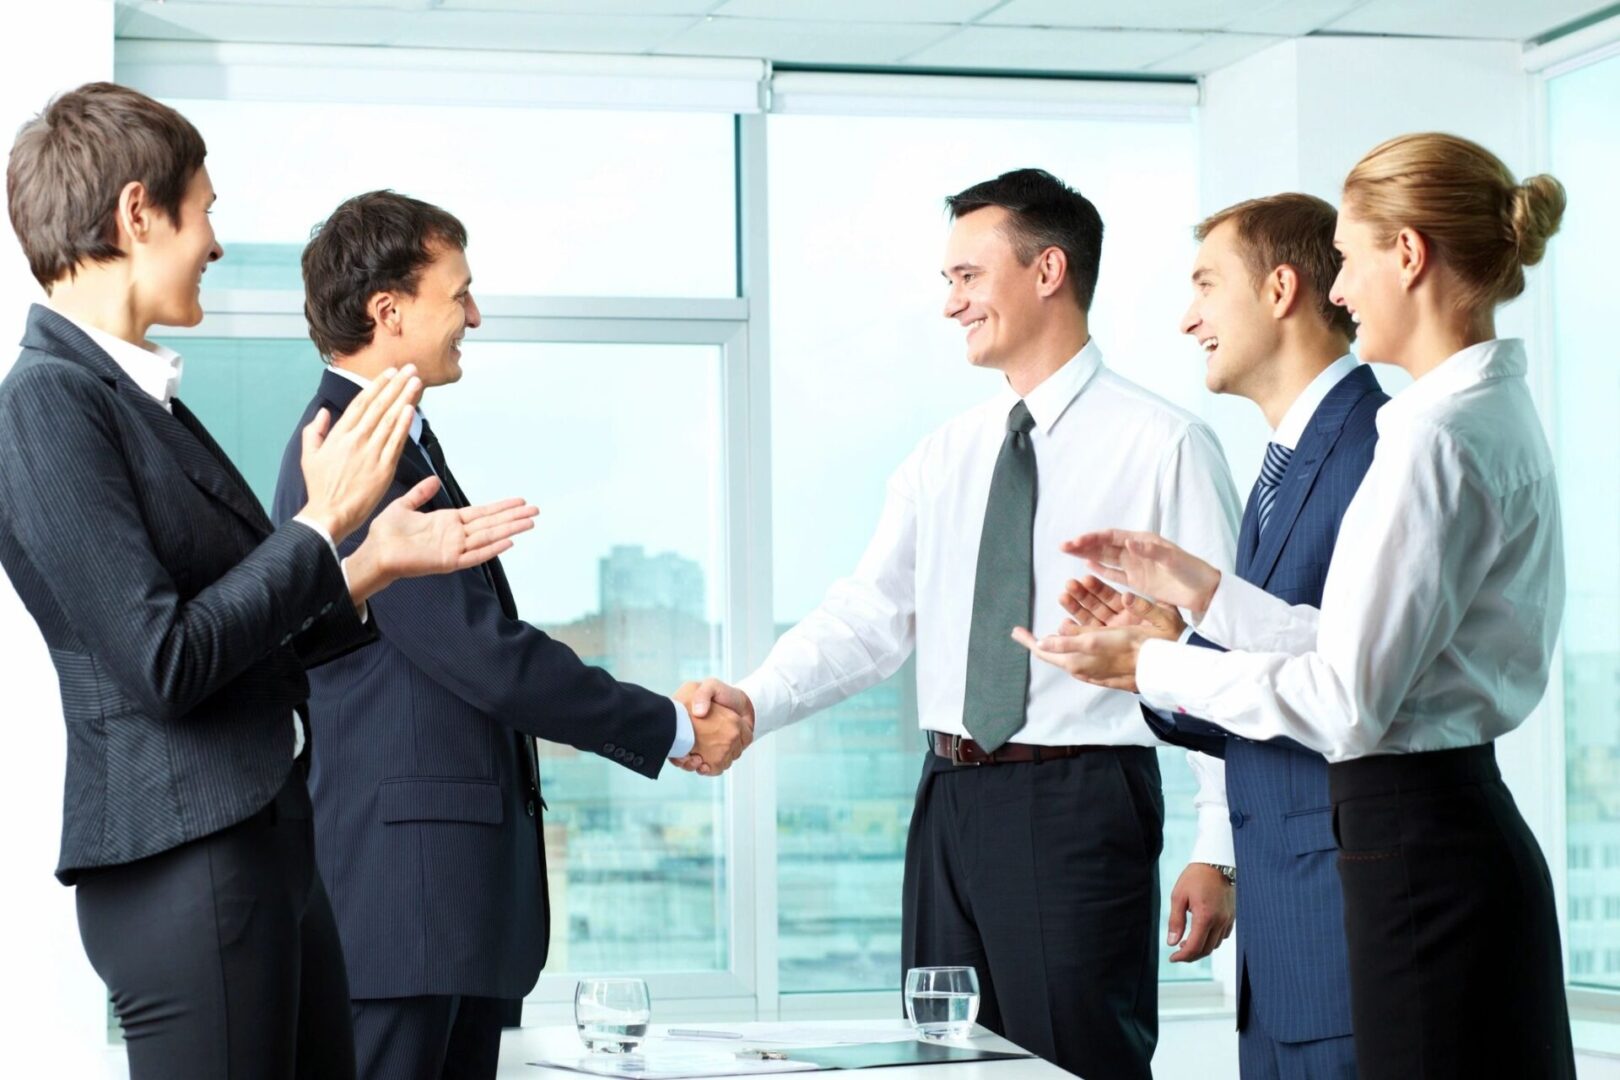 A group of people in suits shaking hands.